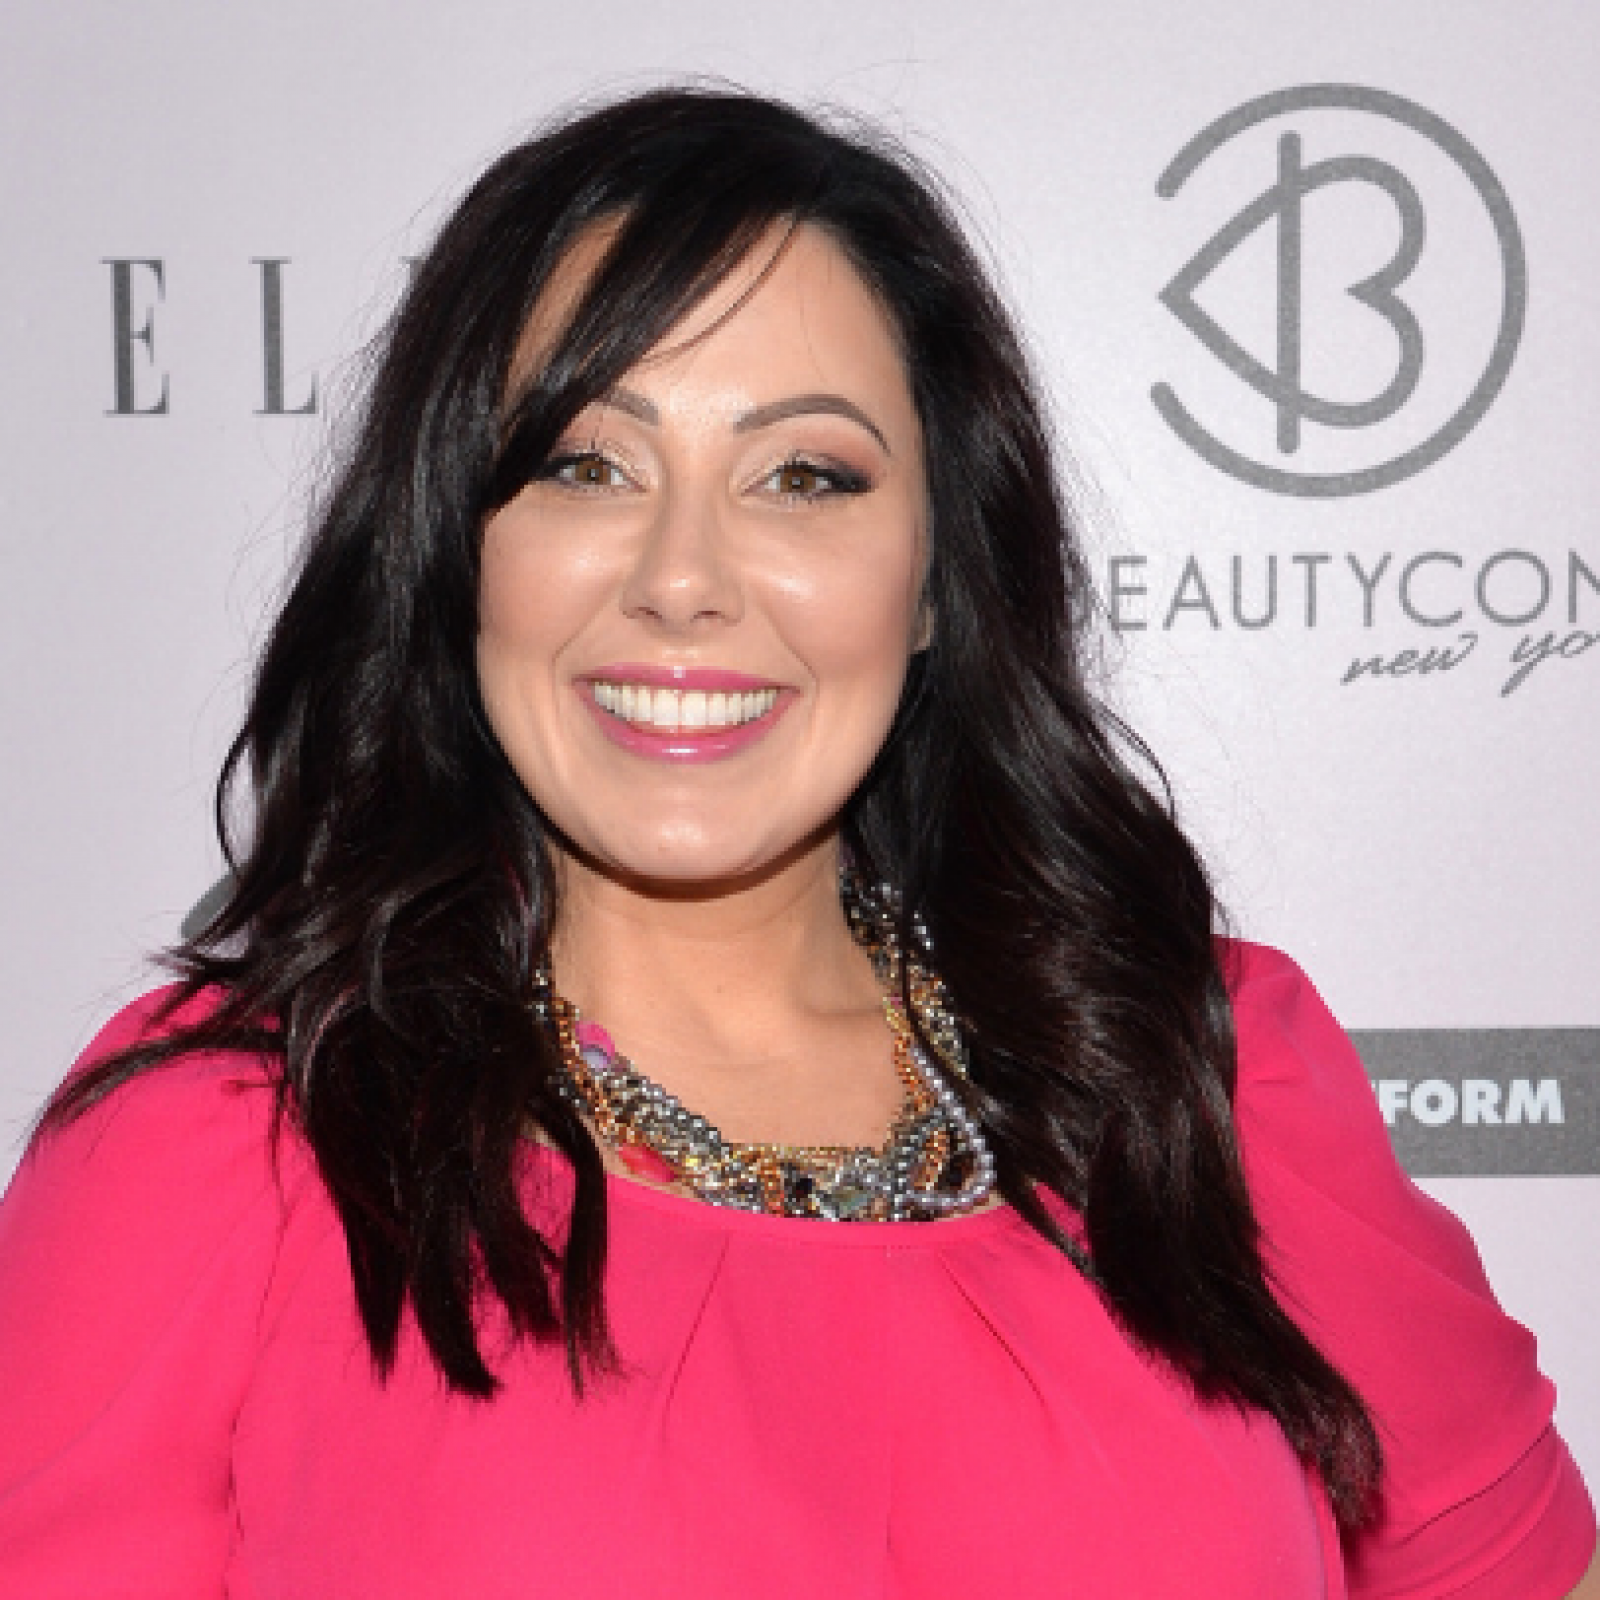 Who Is Marlena Stell? Makeup Geek CEO Calls Out Beauty Influencers